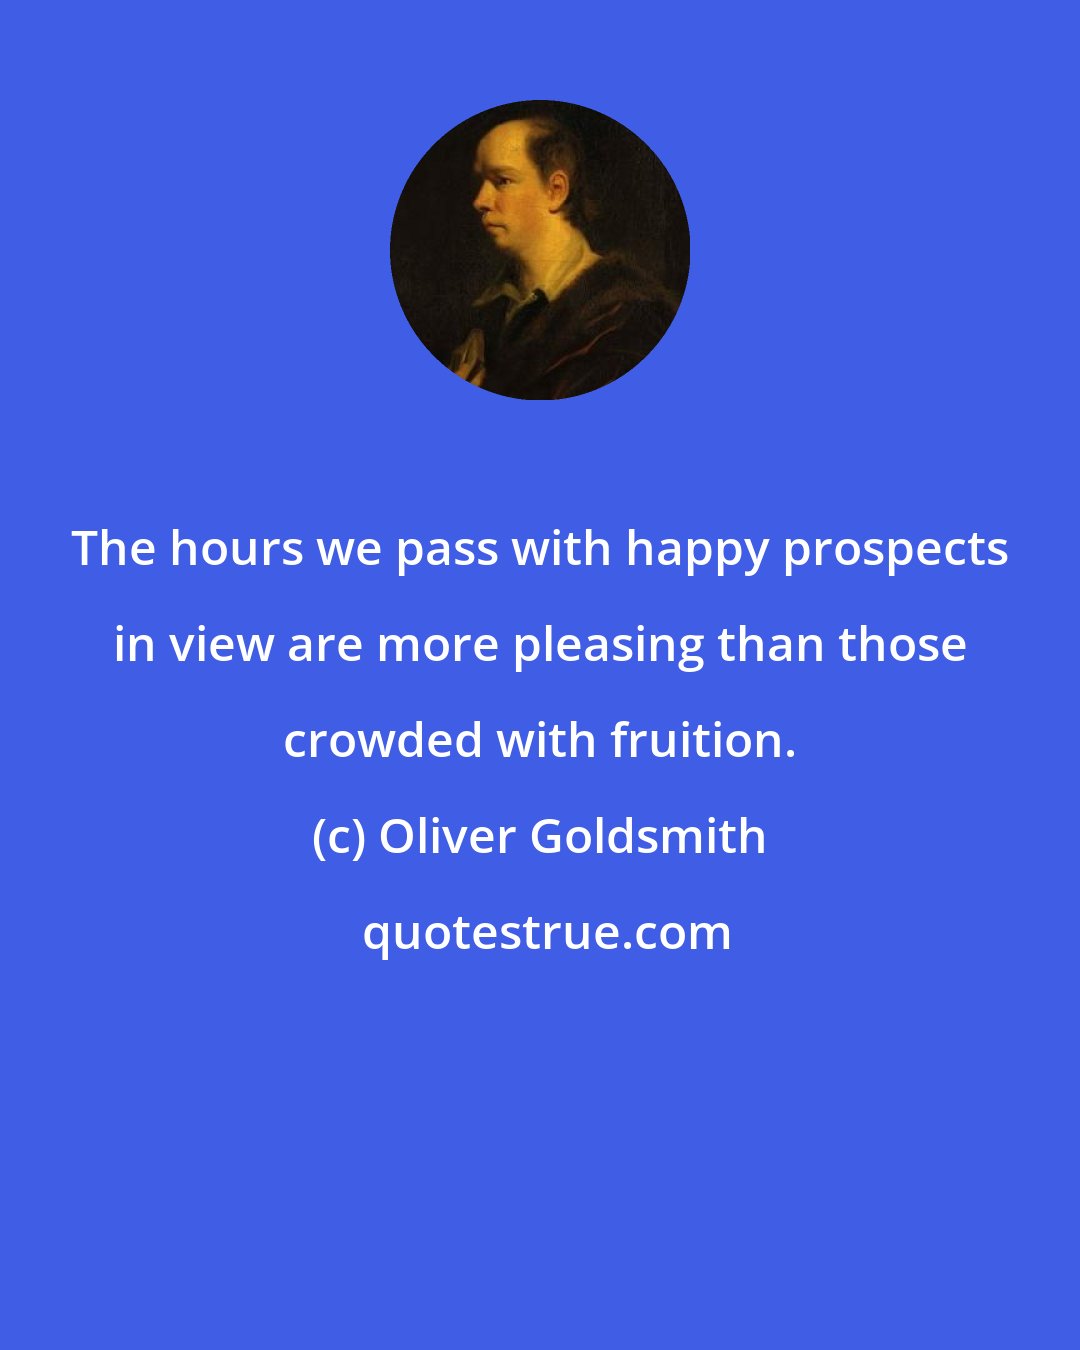 Oliver Goldsmith: The hours we pass with happy prospects in view are more pleasing than those crowded with fruition.